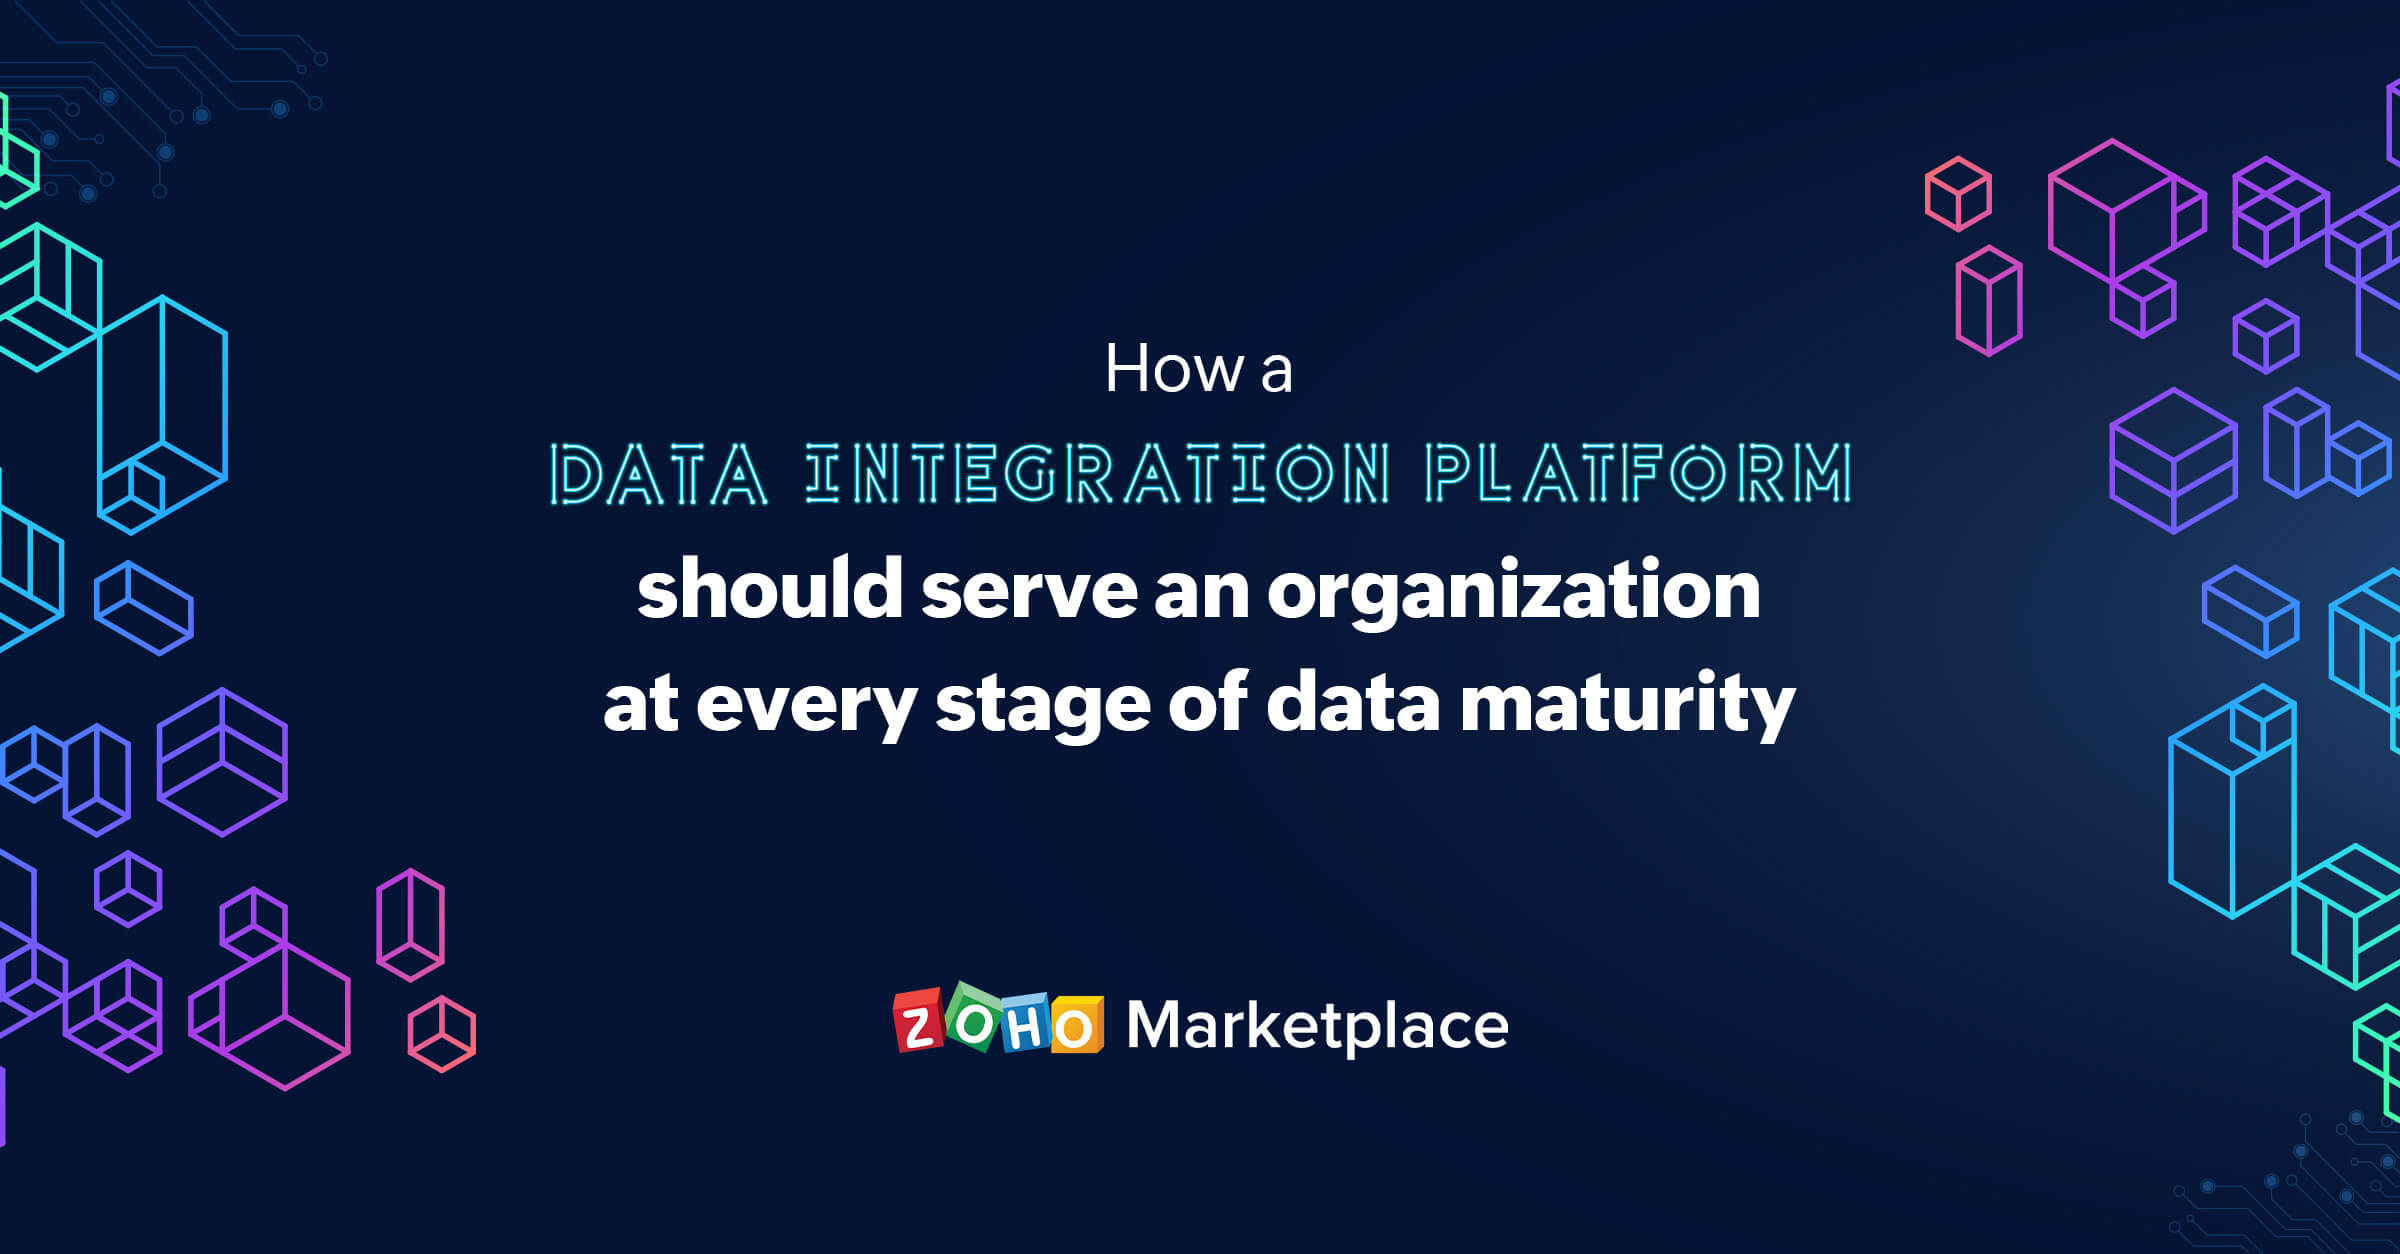 How a data integration platform should server organizations at every stage of data maturity